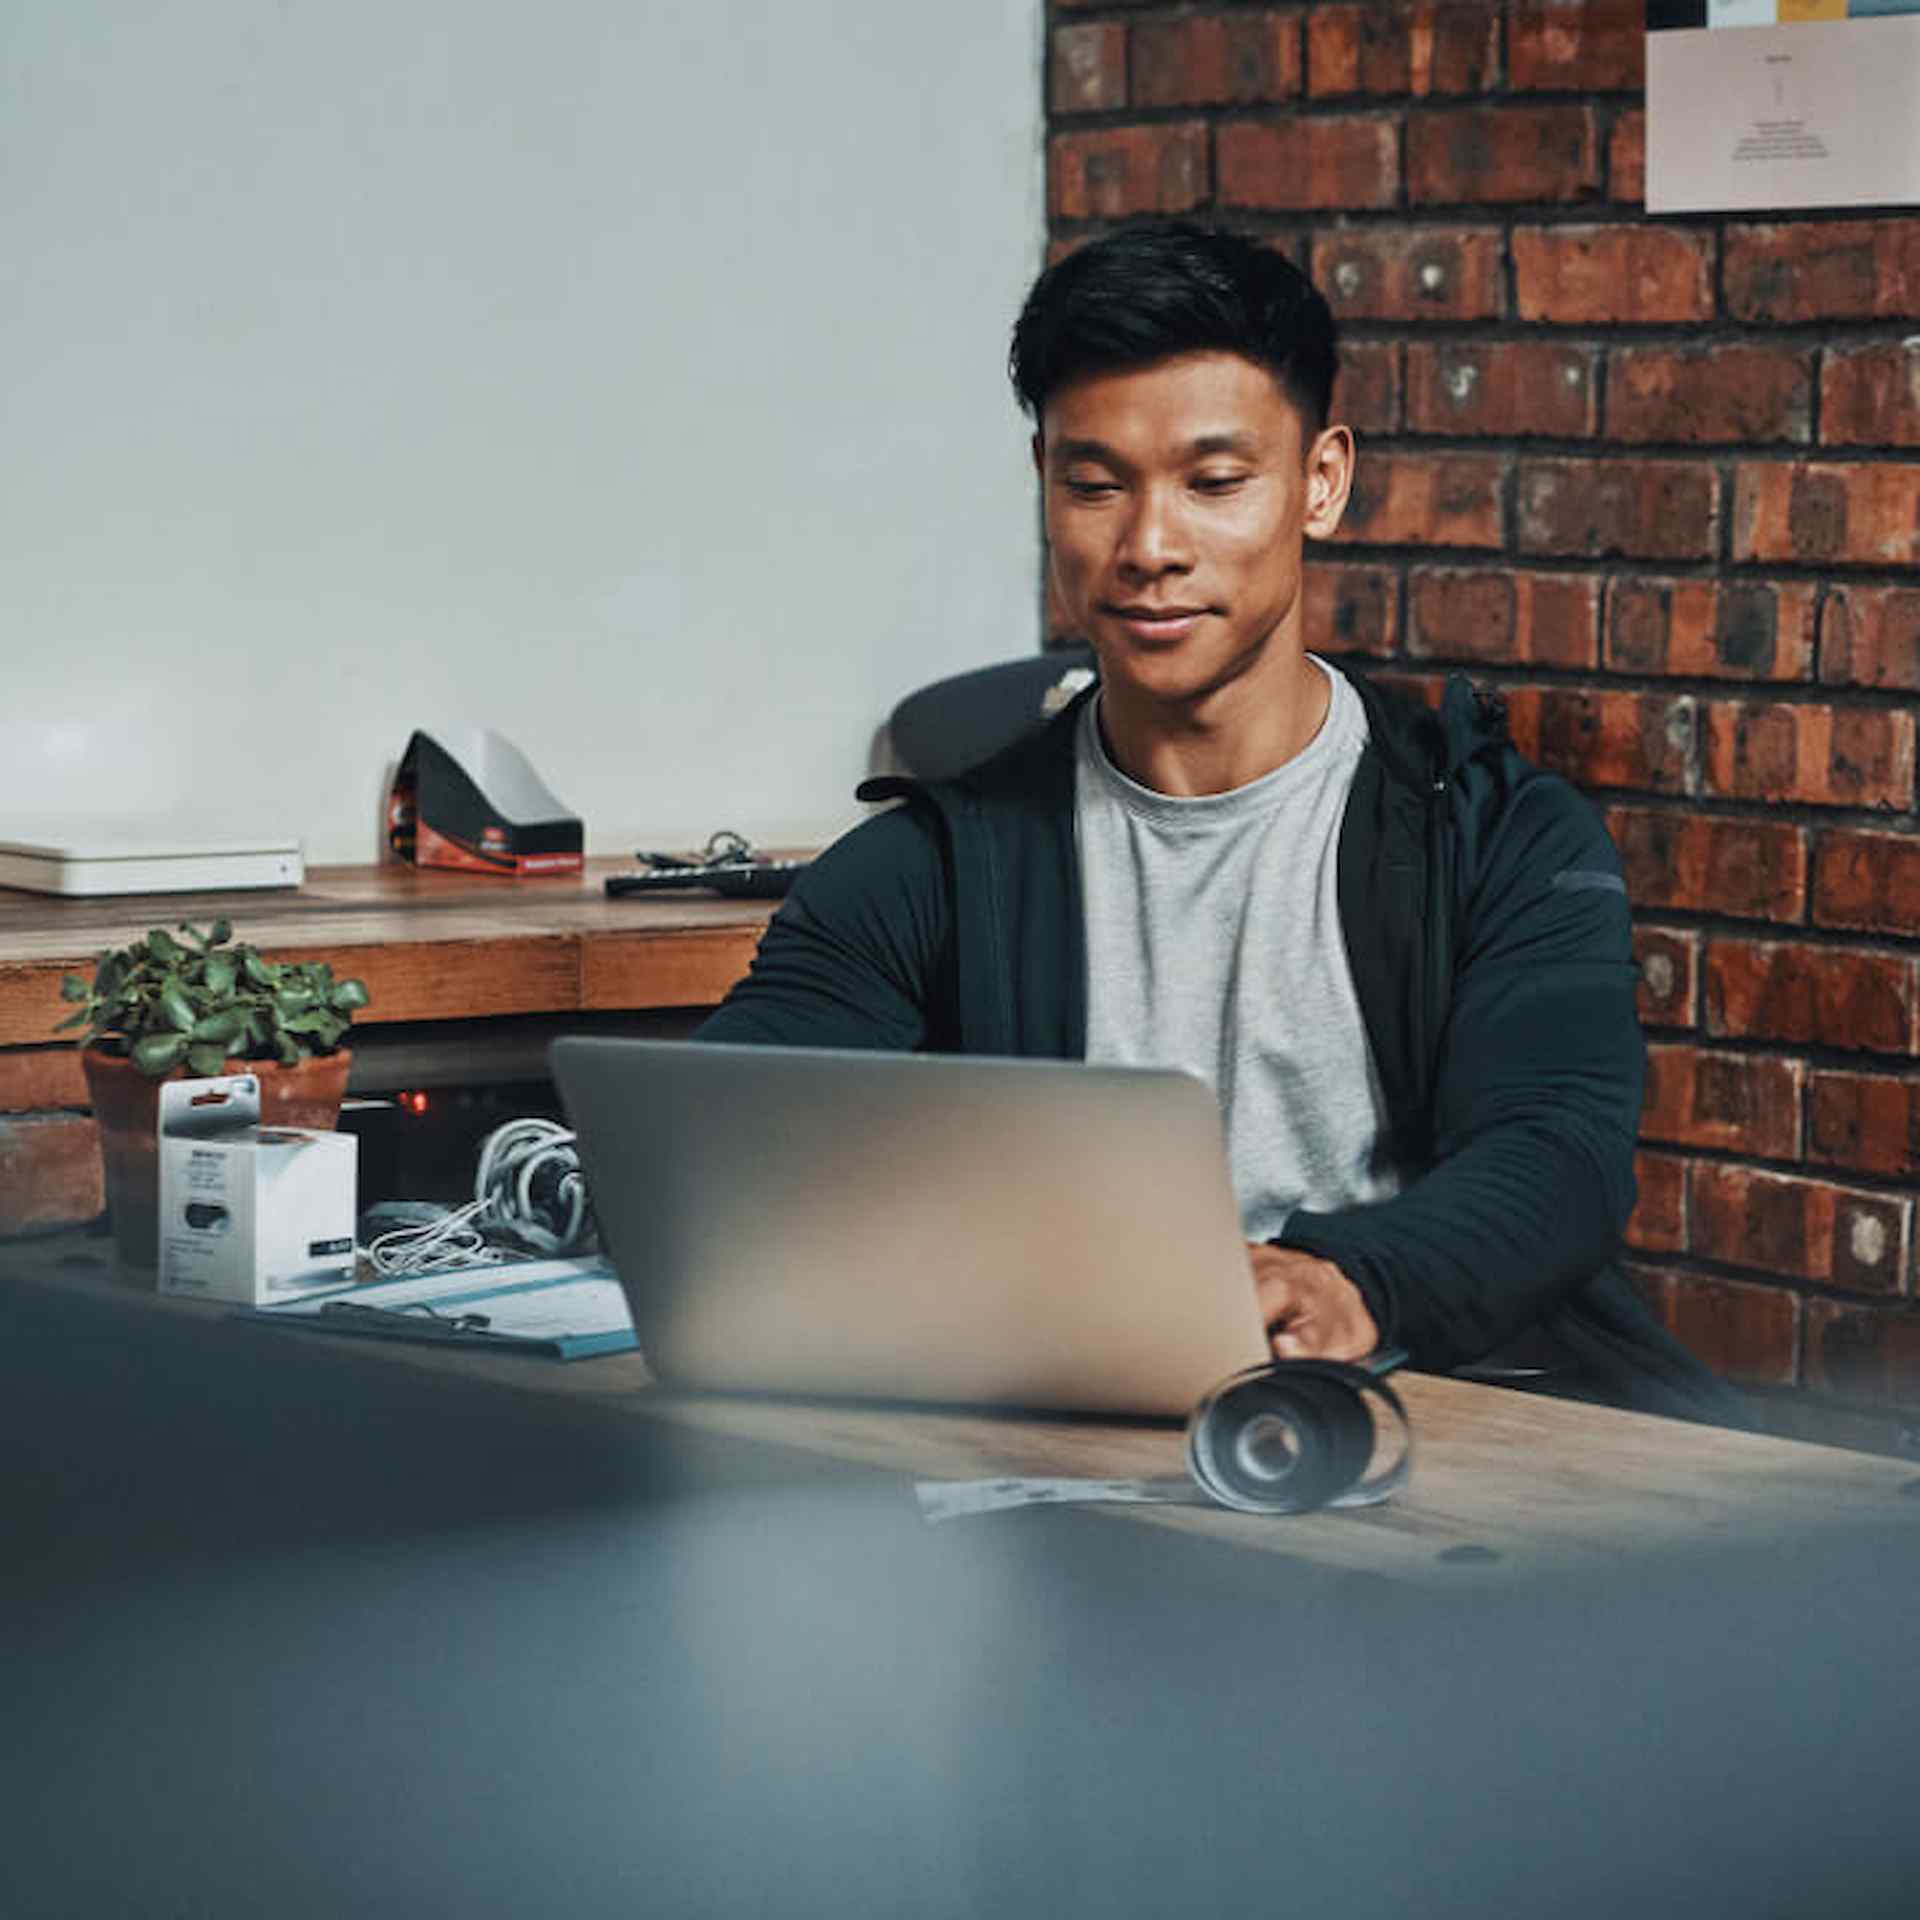 Male sitting on laptop at a desk with brick background